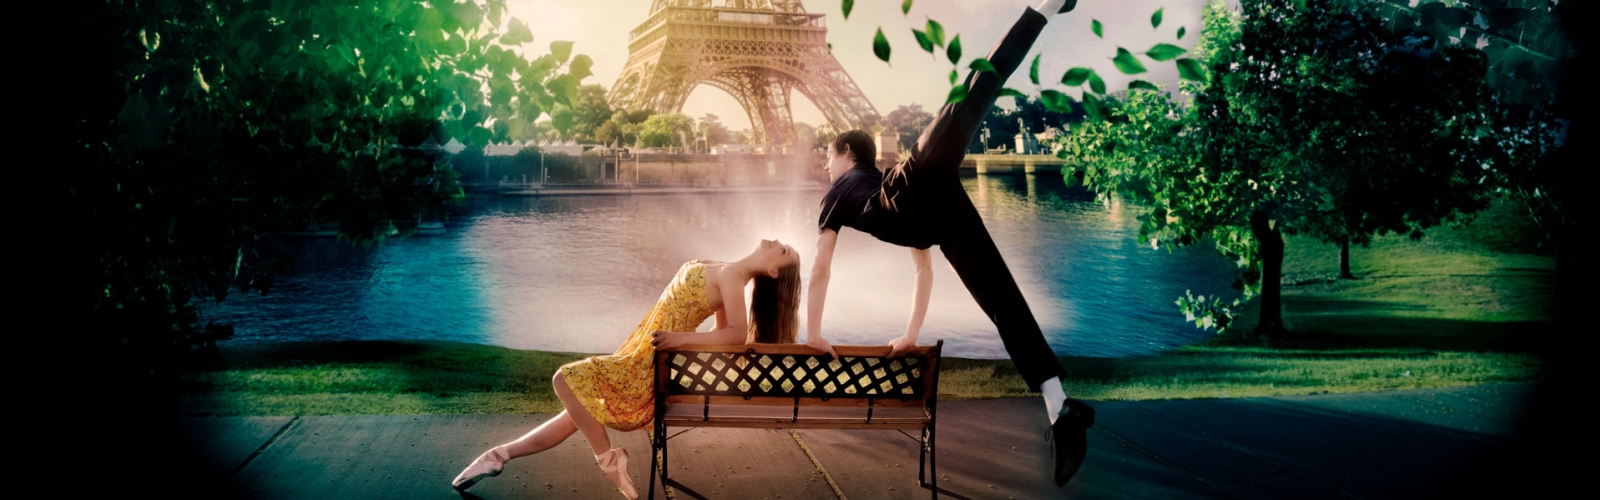 A woman and man dancing on a bench in front of the Eiffel Tower